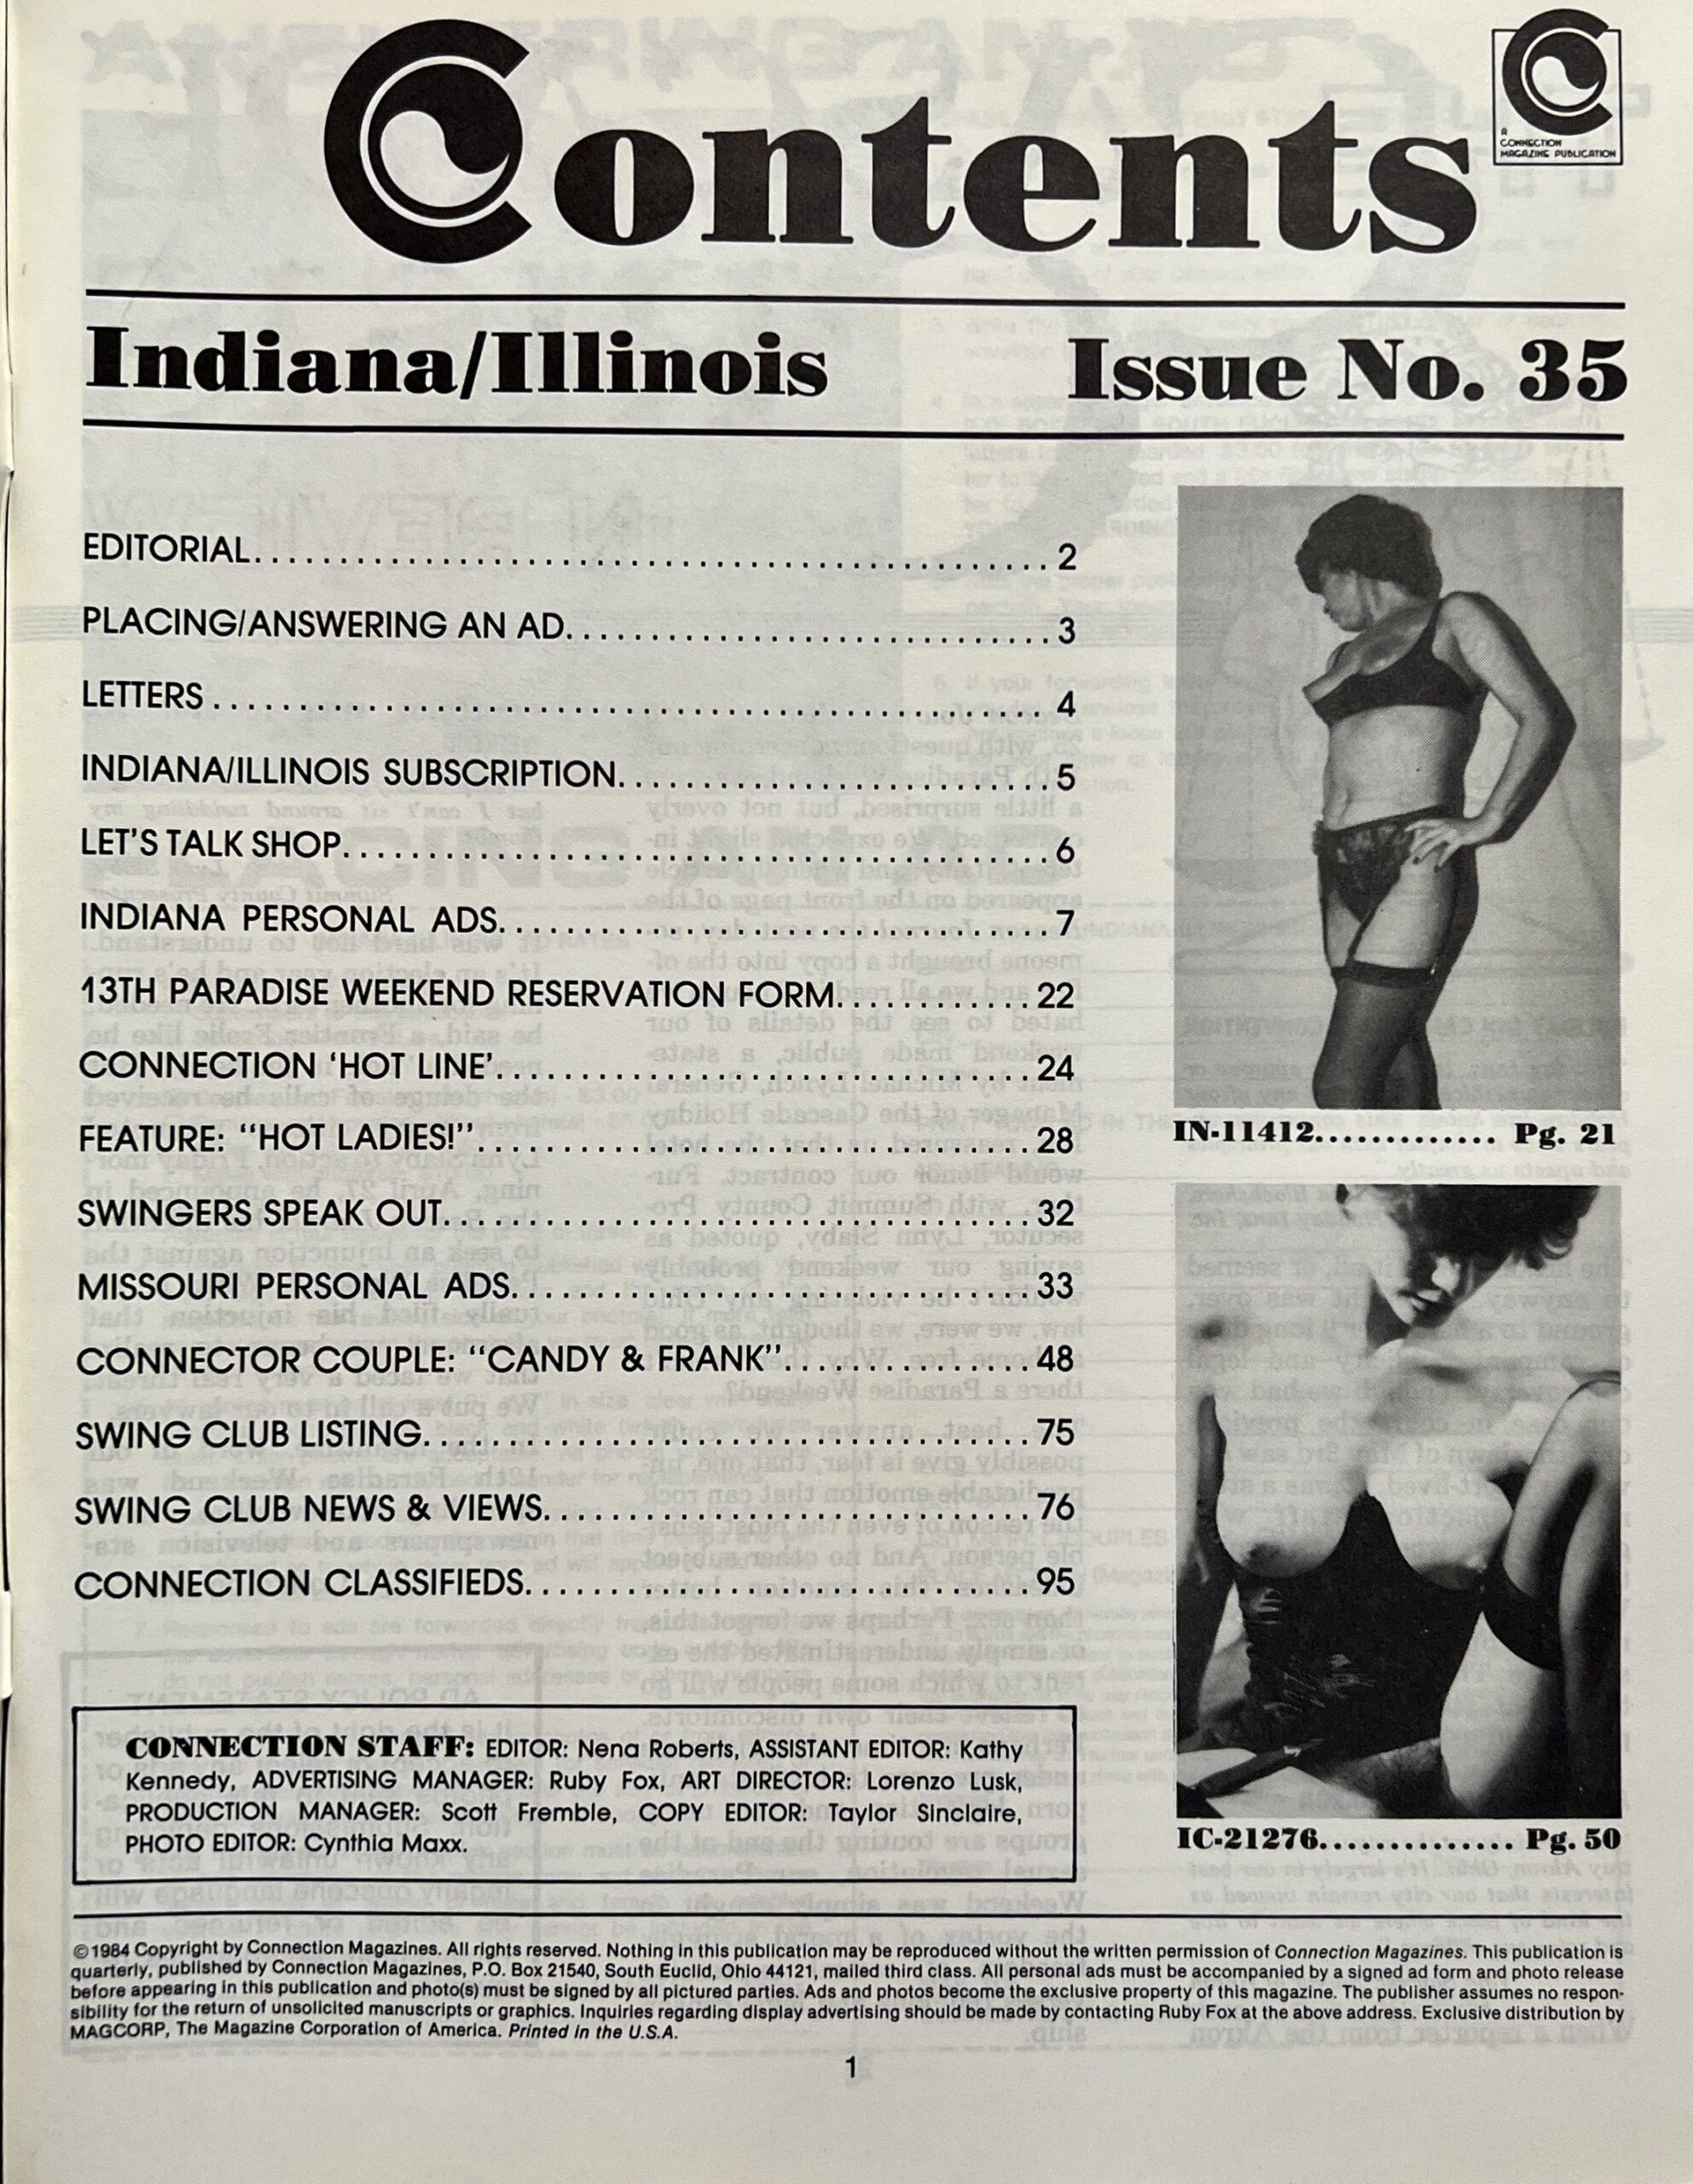 Indiana Illinois Connection #34 1984 Adult Personals-Swingers-Contatcts Magazine photo